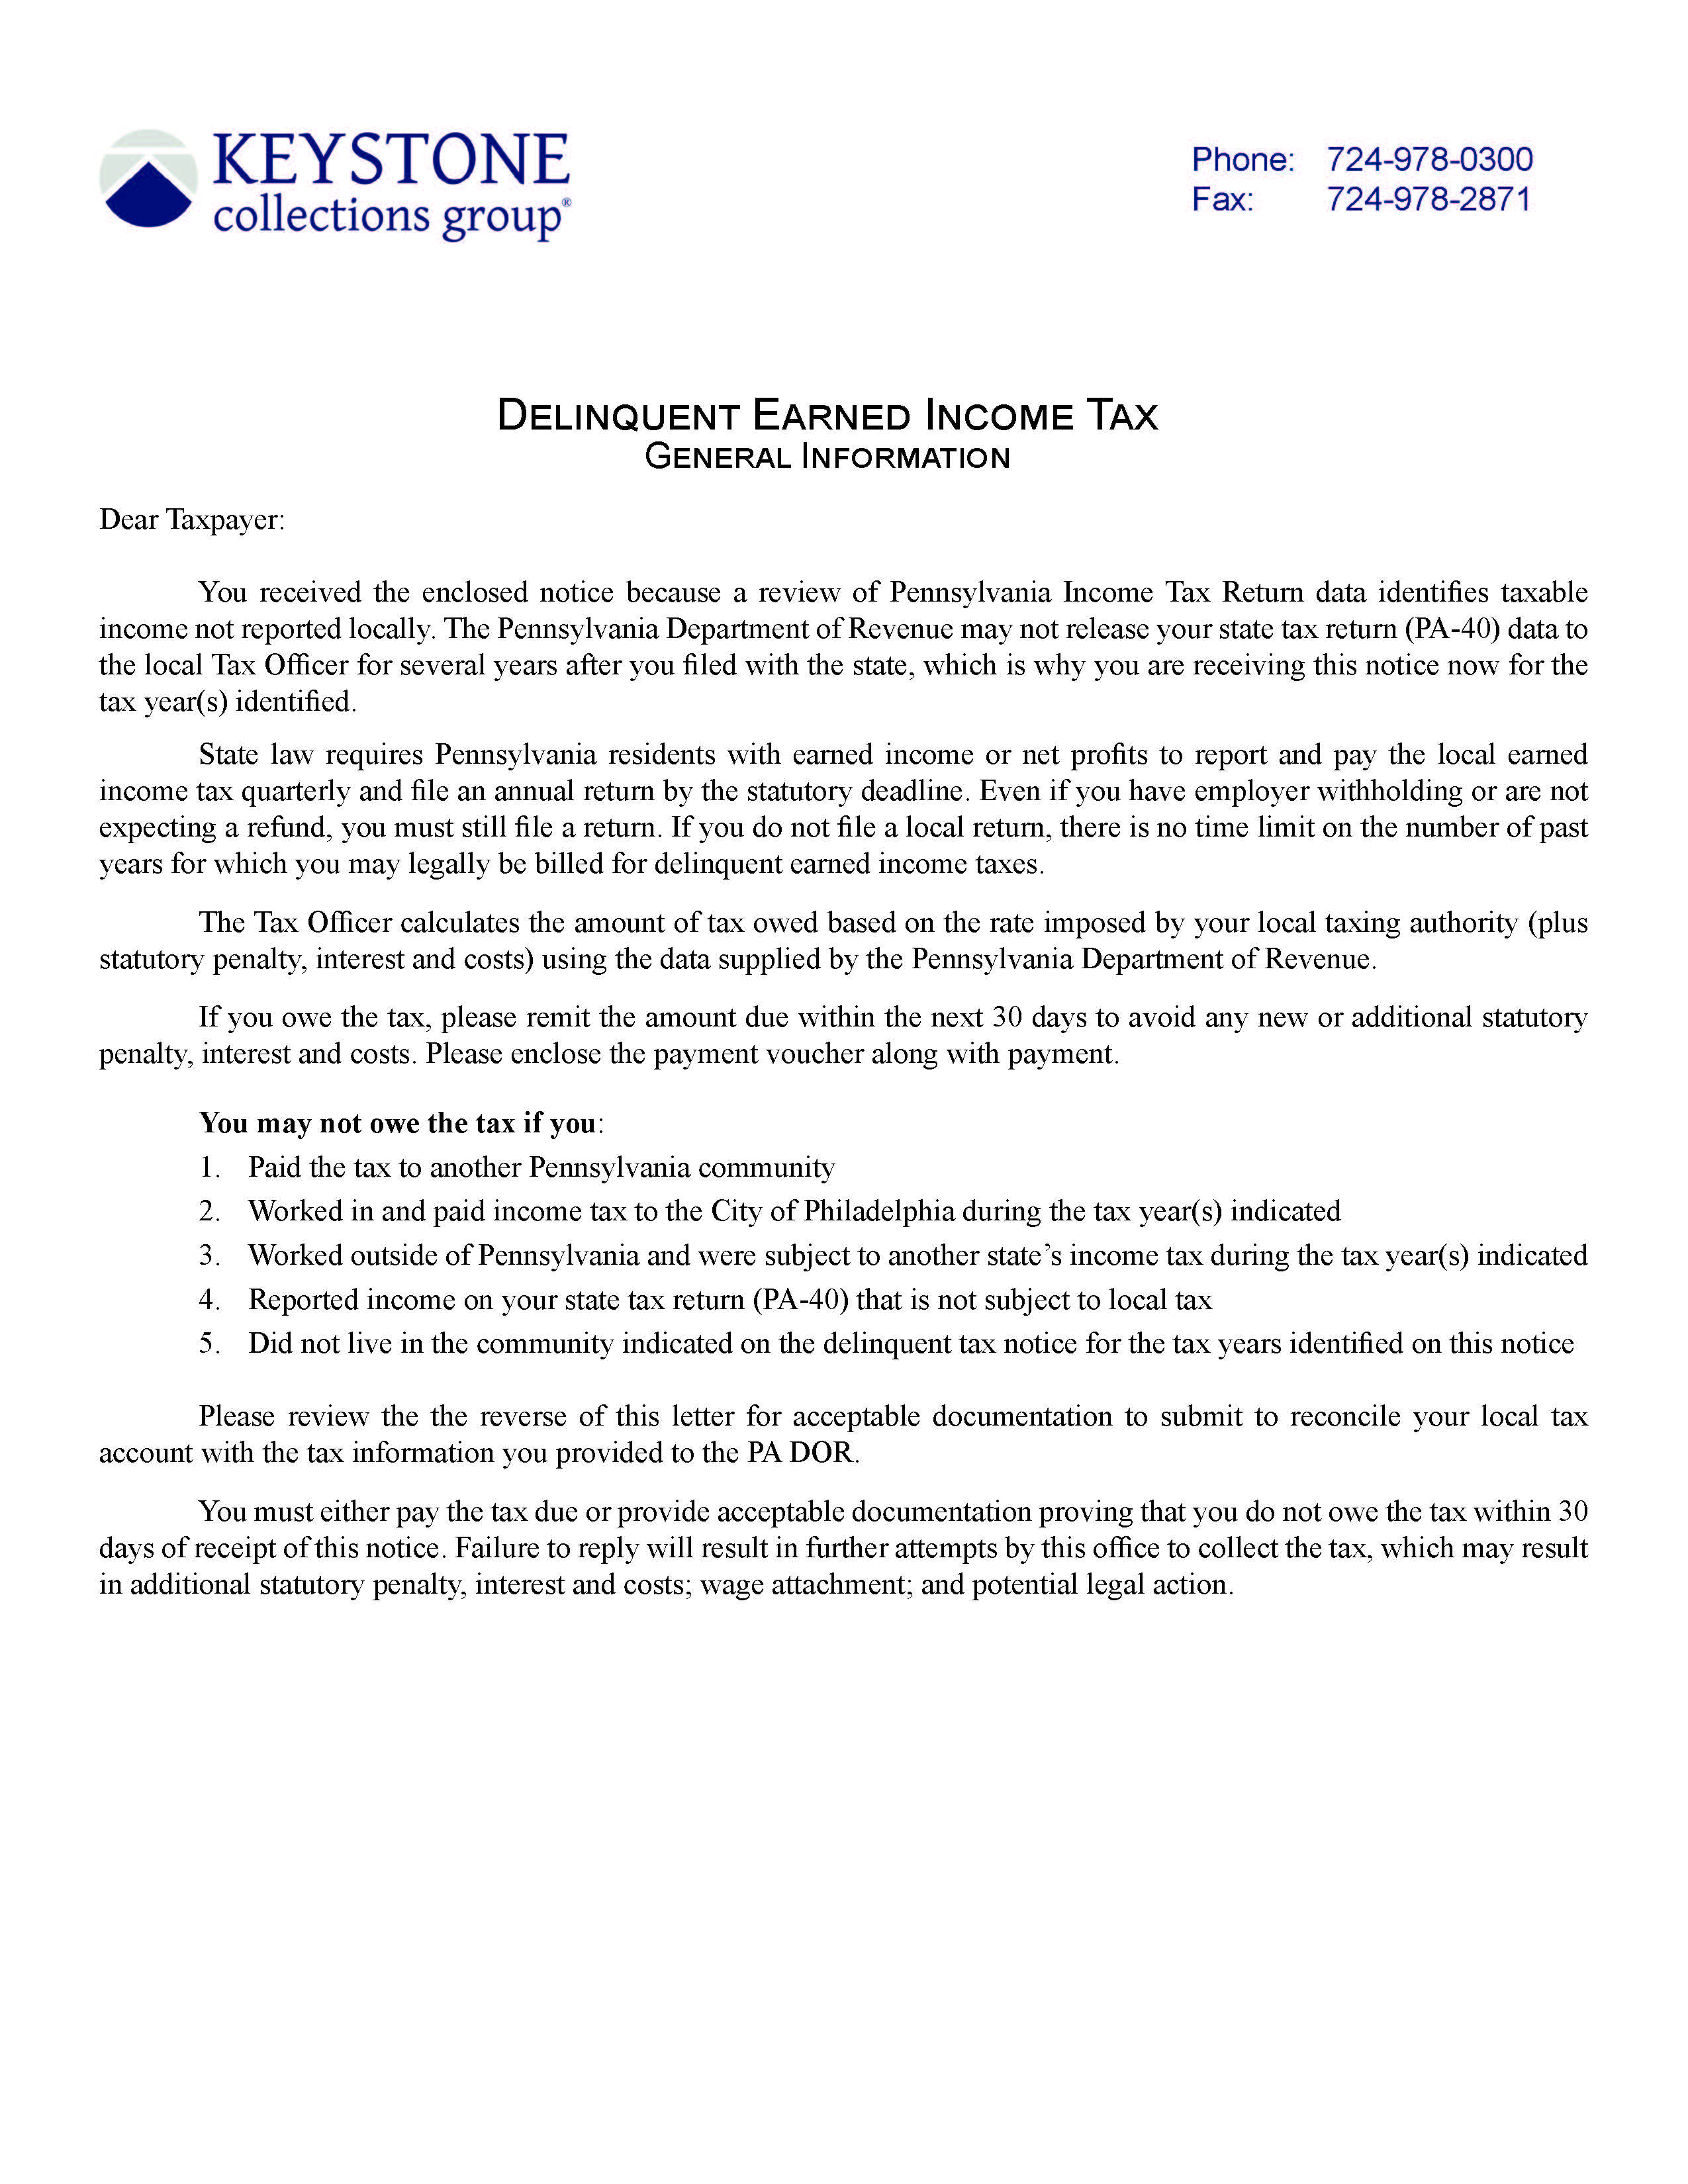 Delinquent Notice Insert pdf_Page_1